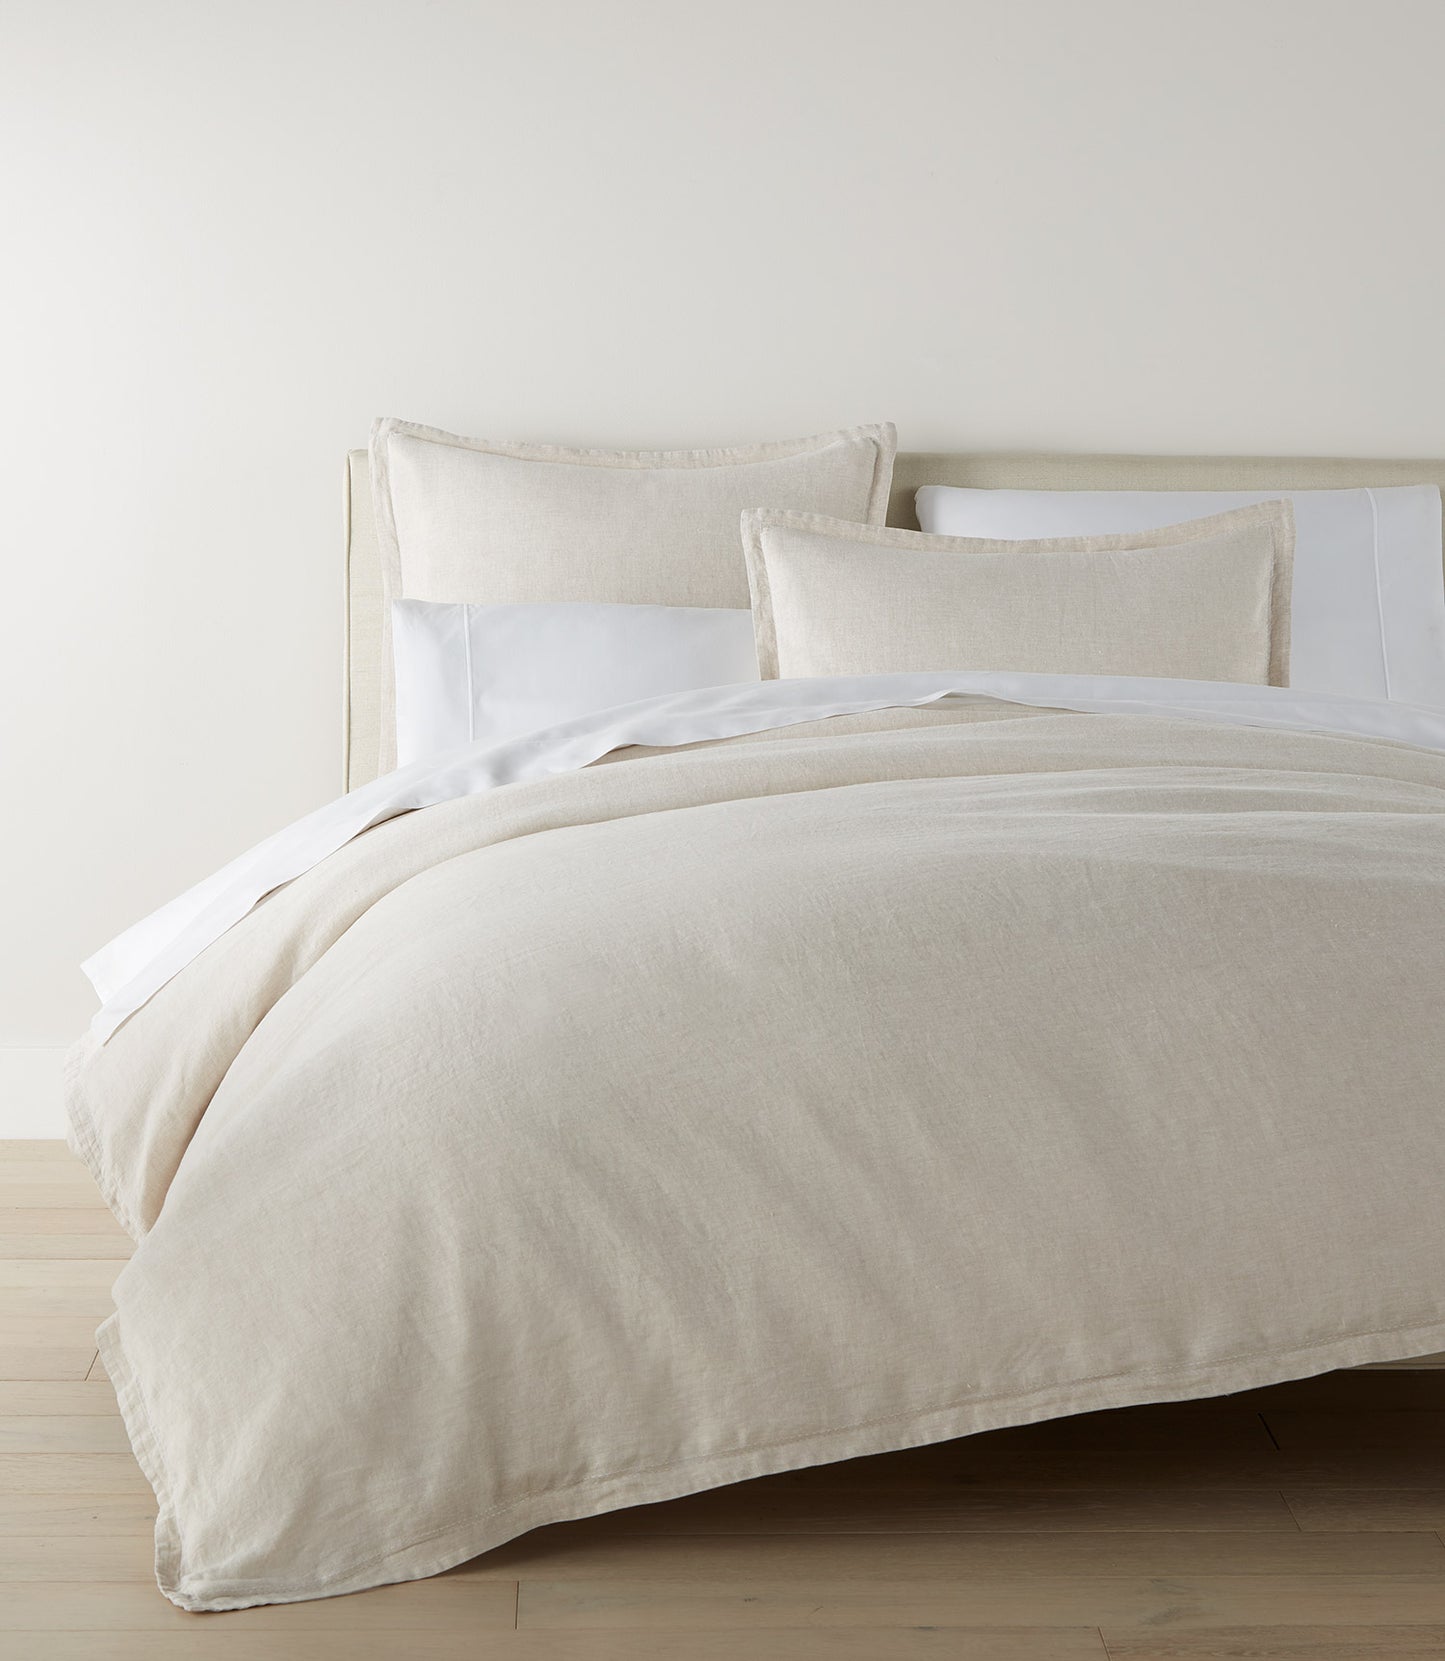 European Washed Linen Shams on bed with duvet, Natural